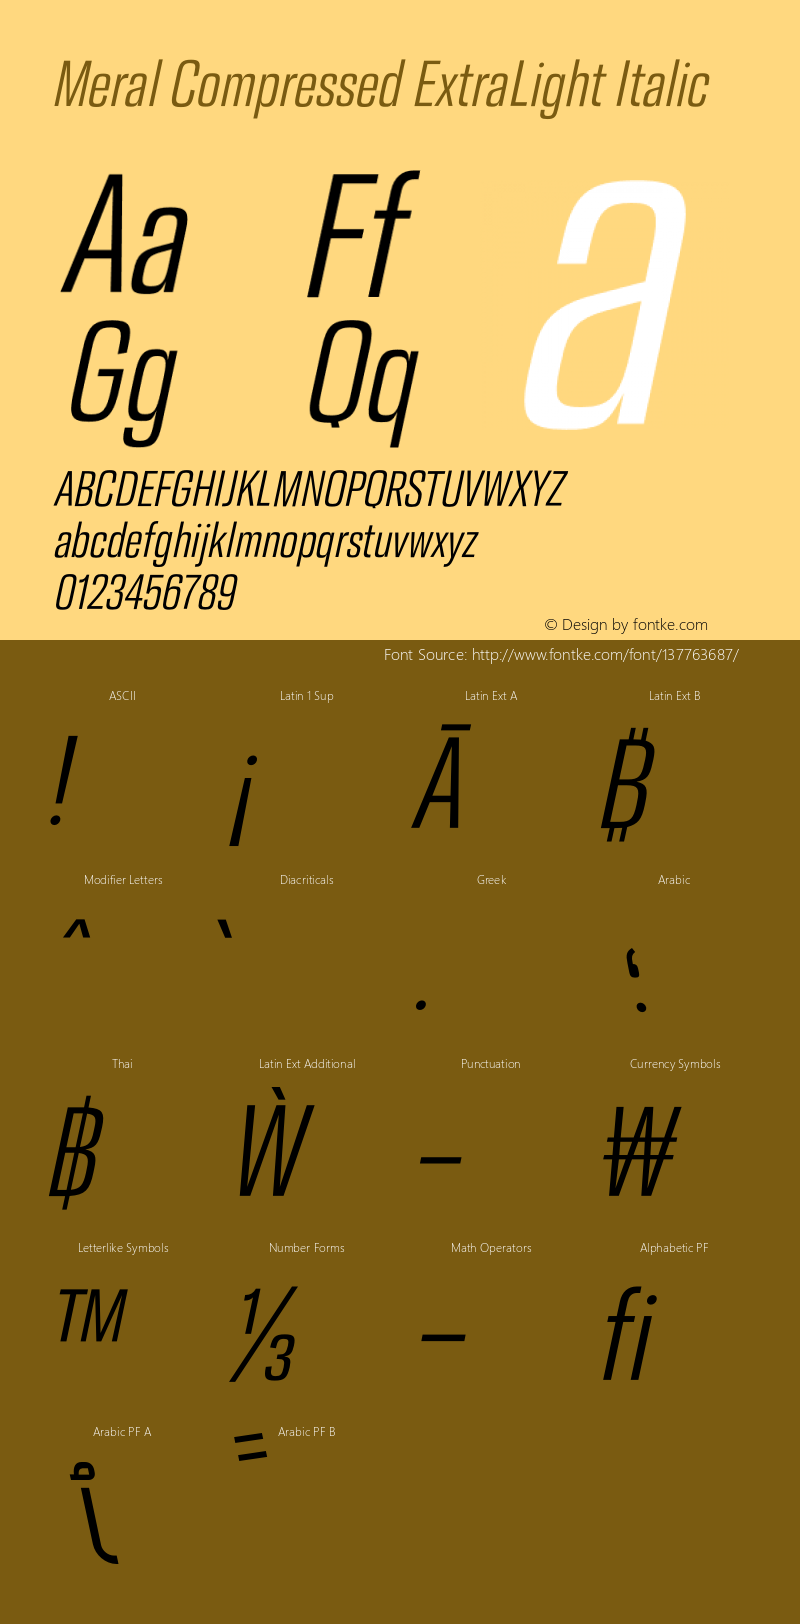 Meral Compressed ExtraLight Italic Version 1.000;hotconv 1.0.109;makeotfexe 2.5.65596 Font Sample